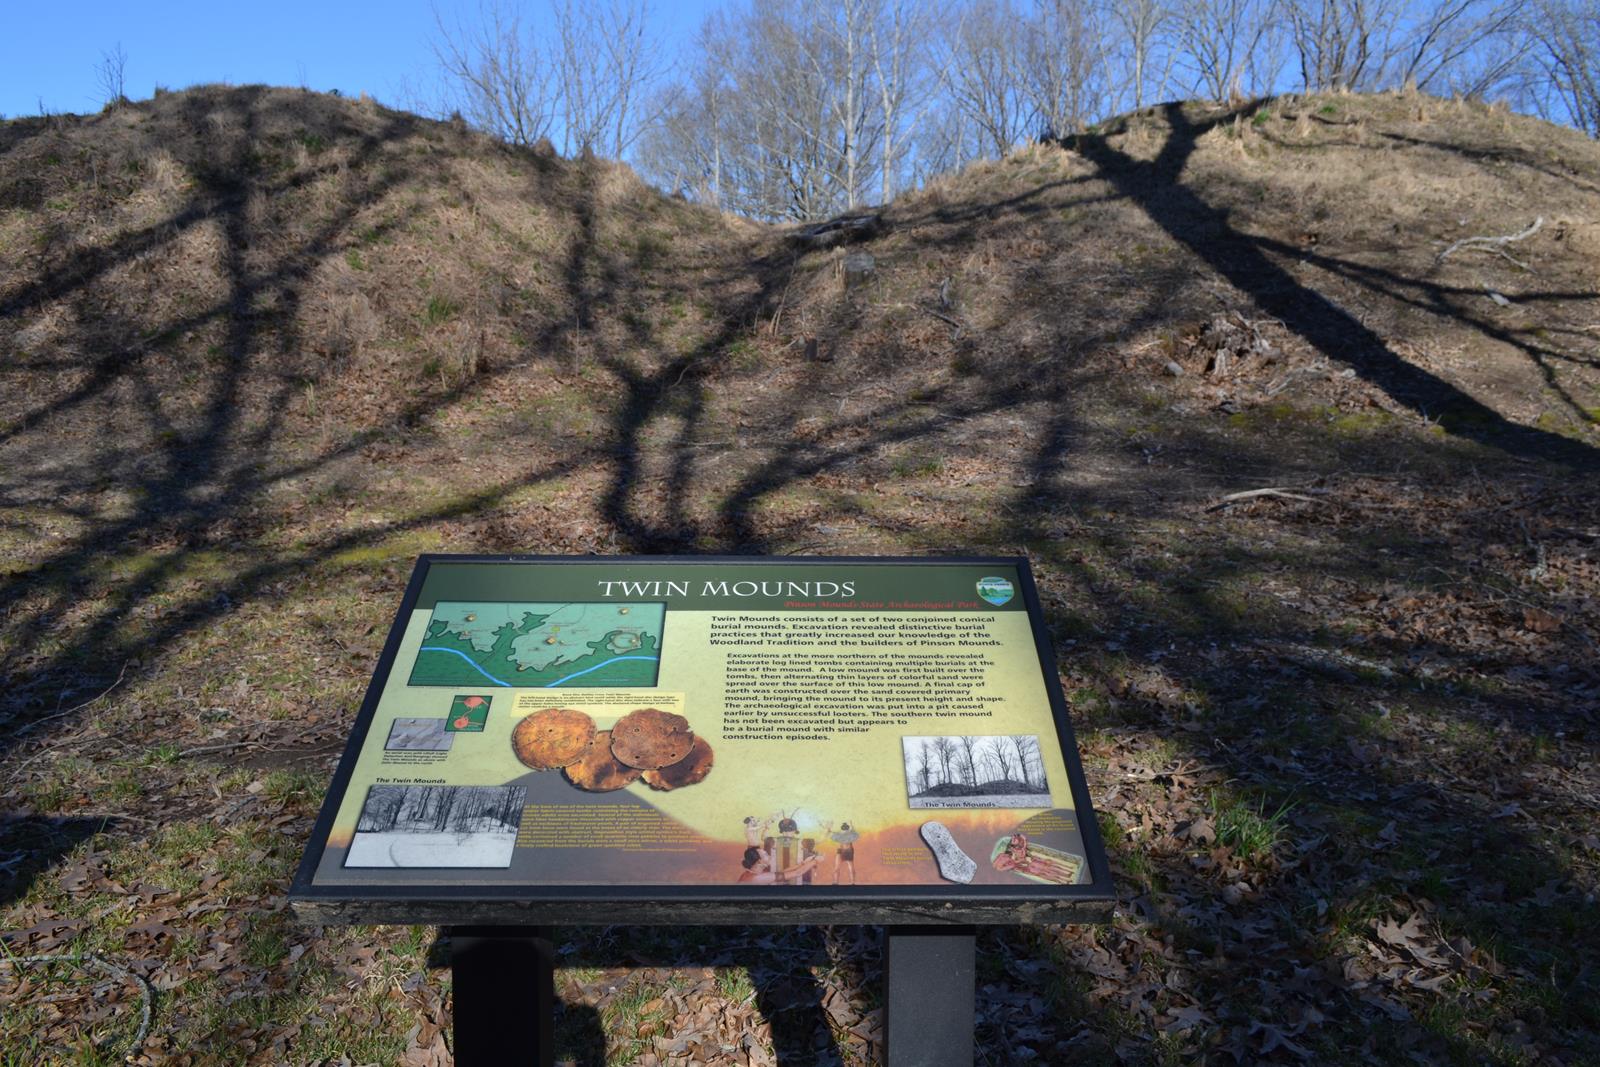 Pinson Mounds State Park contains 15 Native American mounds.